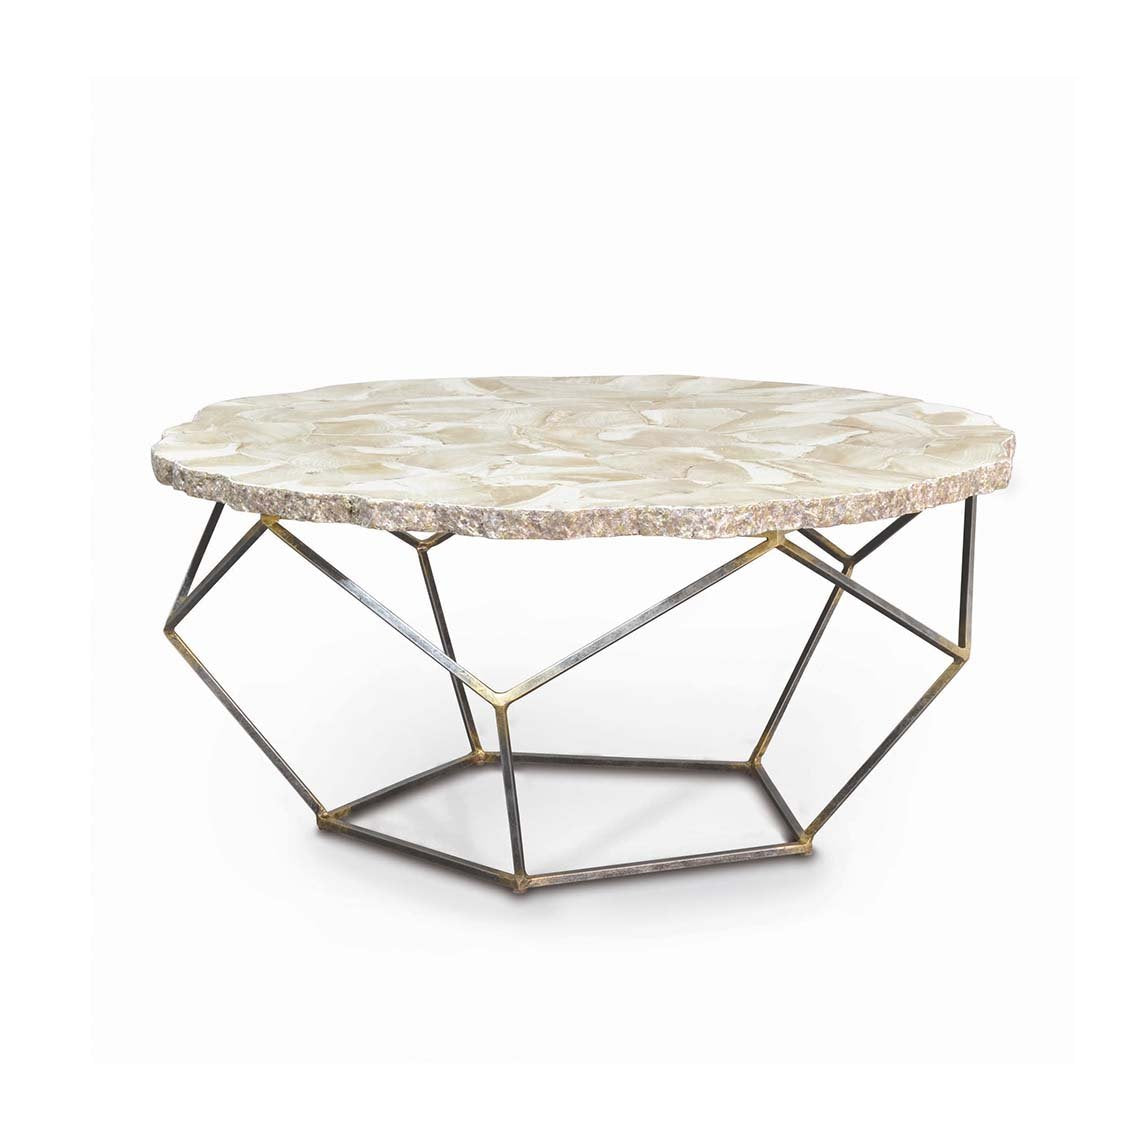 Loren Fossilized Clam Coffee Table